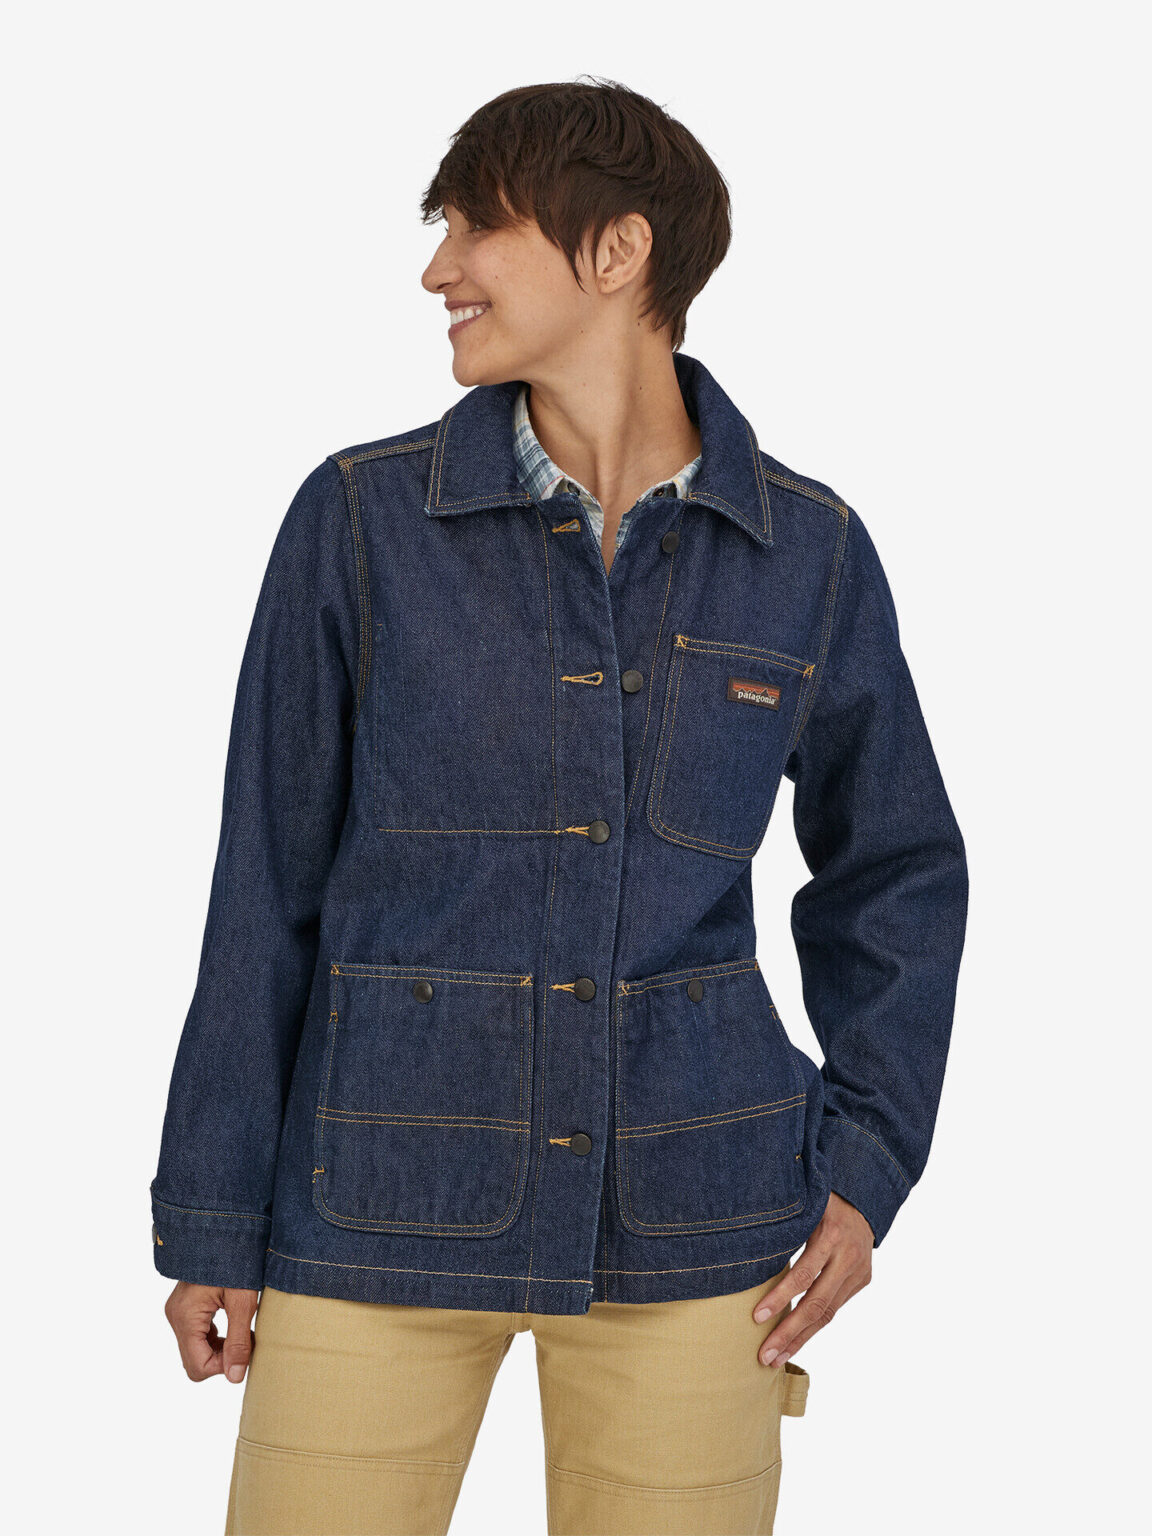 9 Sustainable Denim Jackets For 2023 - The Good Trade